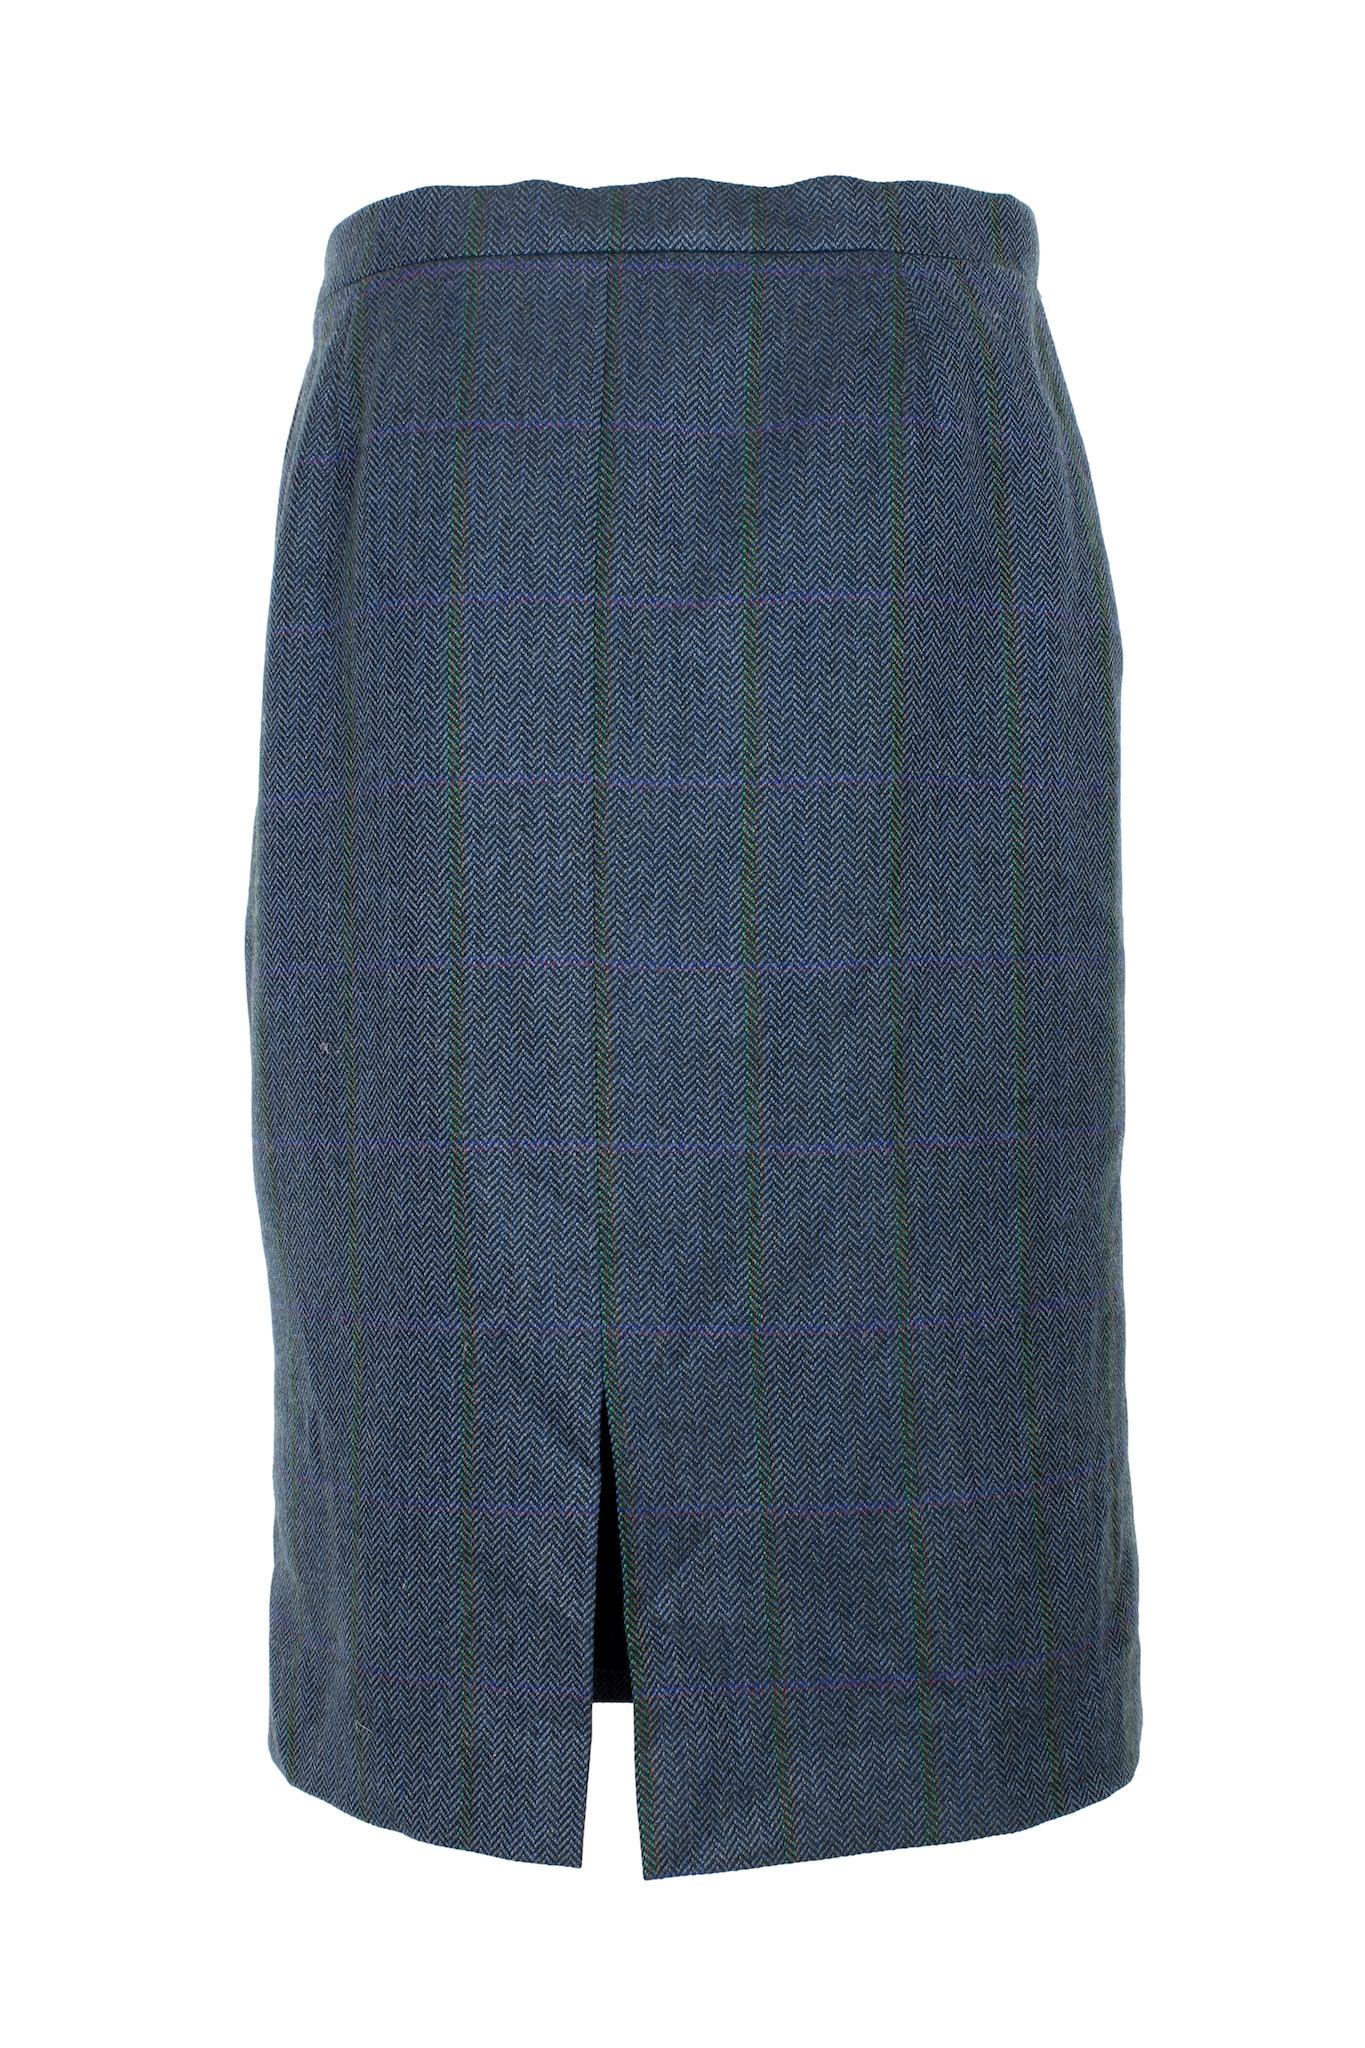 Burberry classic 80s vintage skirt. Sheath model, knee length, herringbone pattern in blue and black. 100% wool fabric, internally lined. Made in England.

Size: 44 It 10 Us 12 Uk

Waist: 38 cm
Length: 65 cm